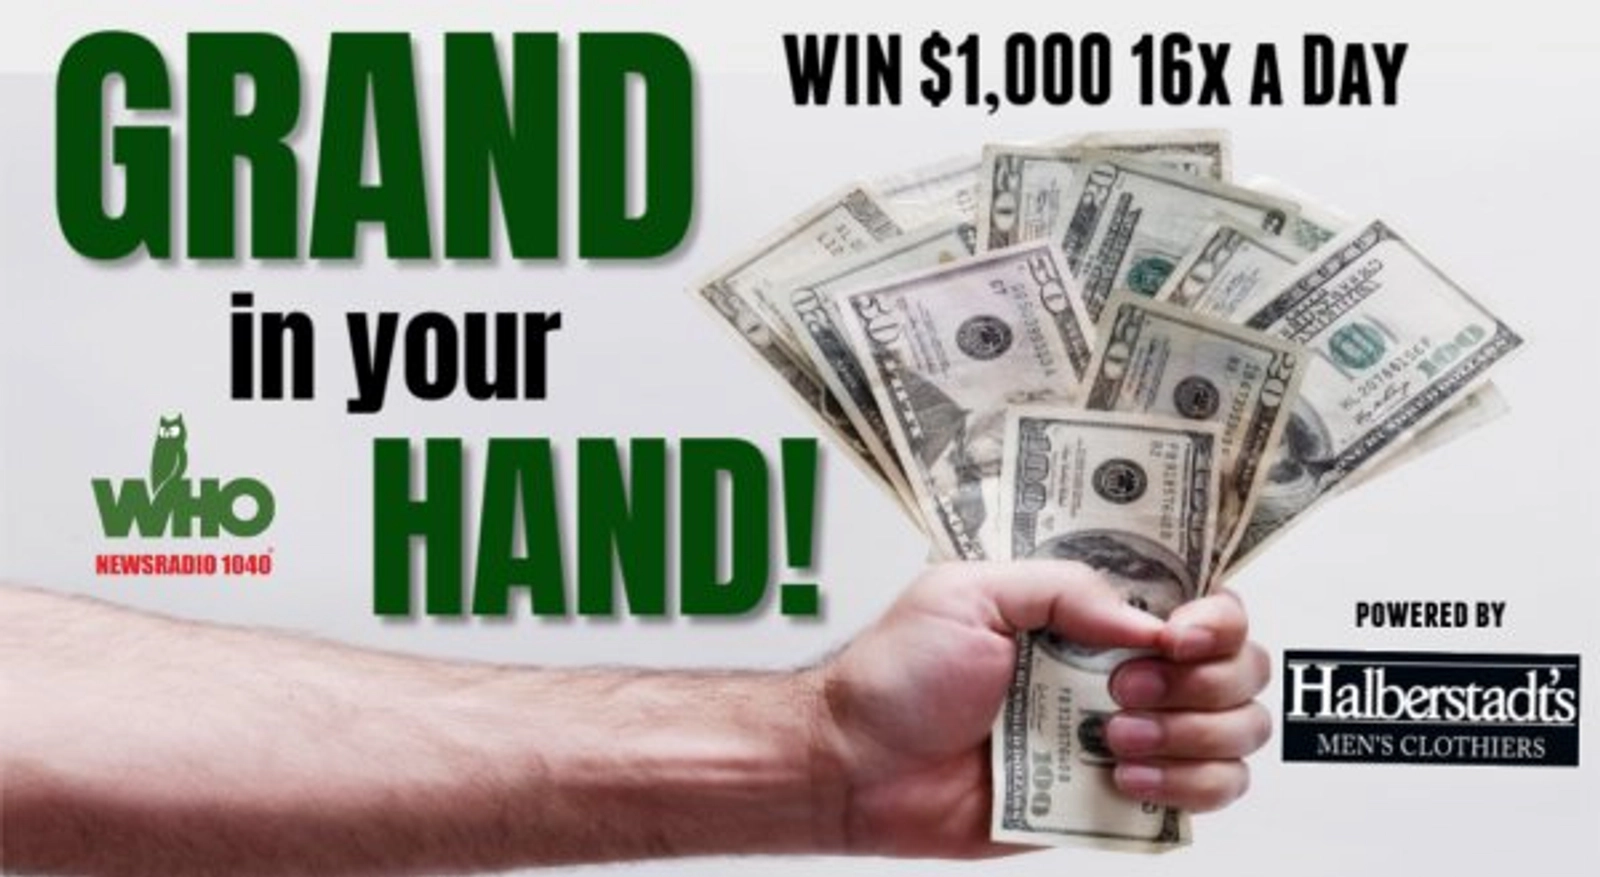  Put a Grand In Your Hand 16X a Day! - Thumbnail Image